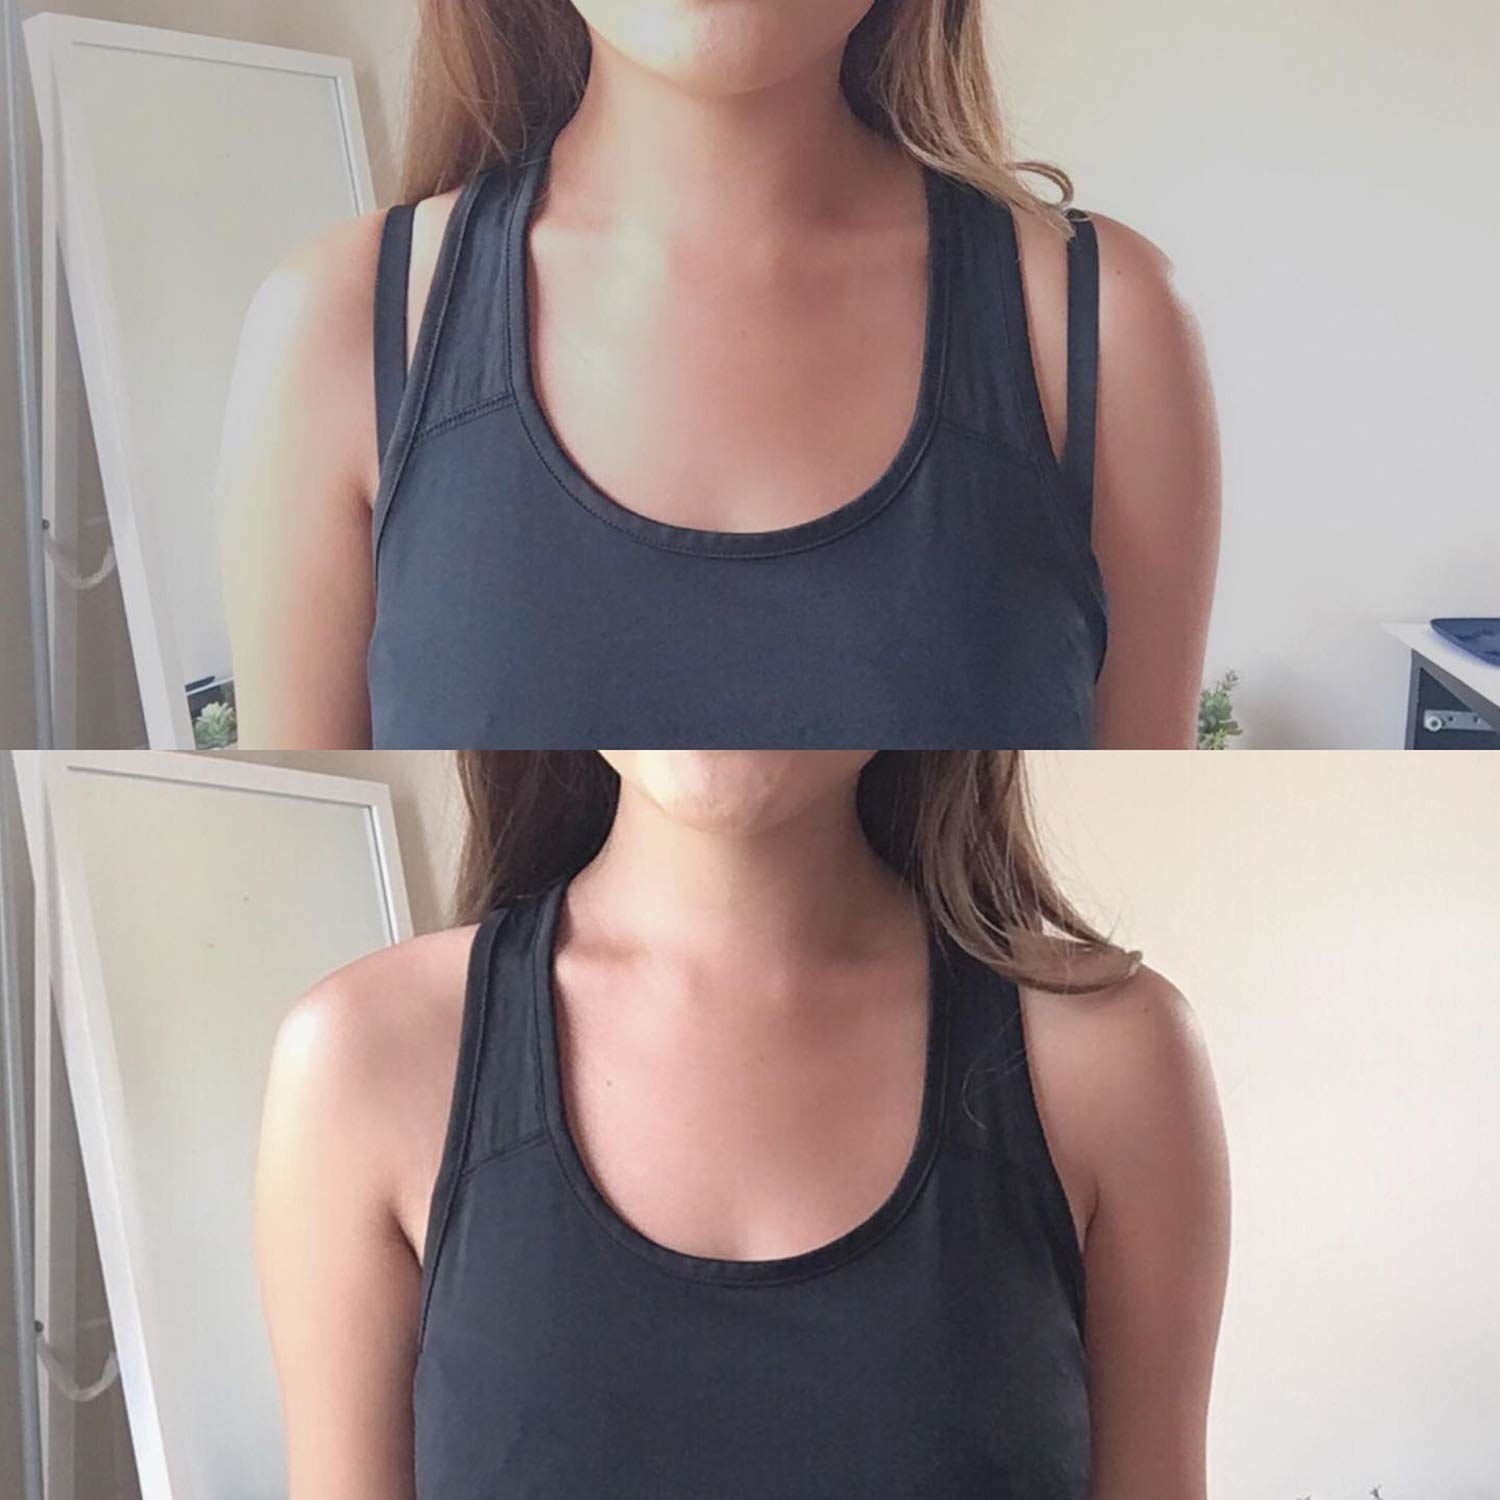 model before and after photo with bra straps showing on top and not showing on bottom